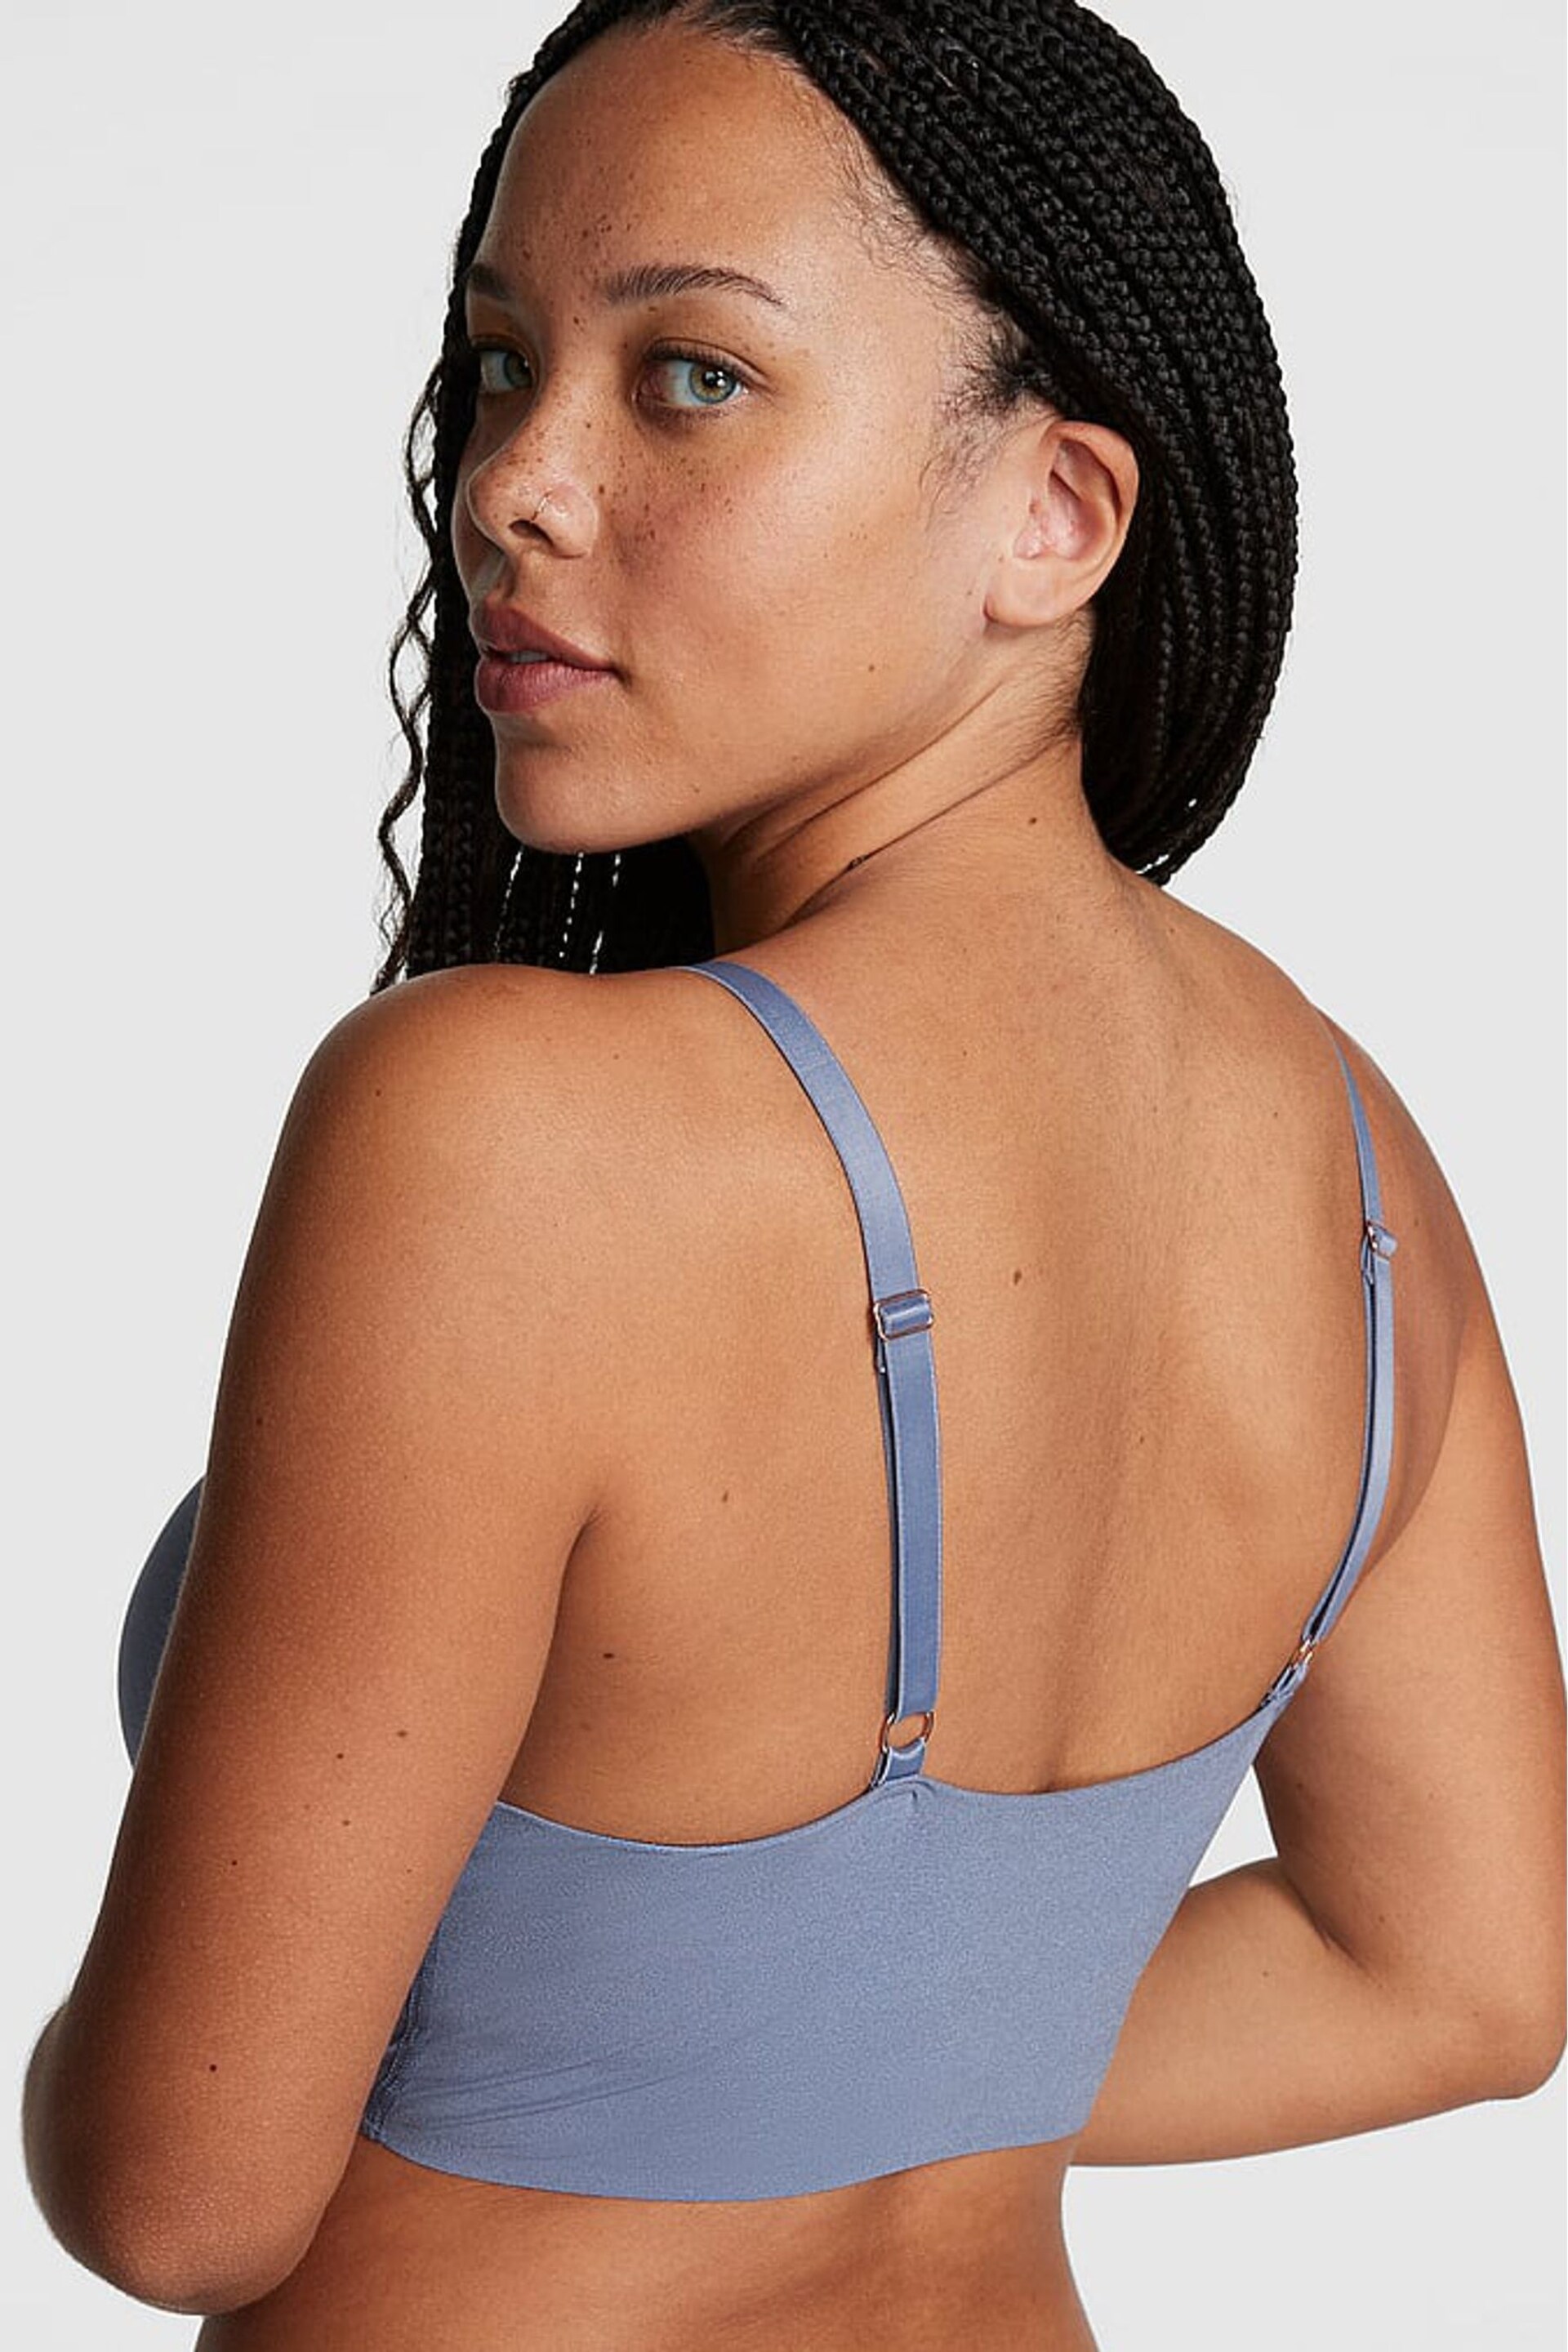 Victoria's Secret PINK Dusty Iris Blue Non Wired Push Up Lounge Bralette - Image 2 of 4